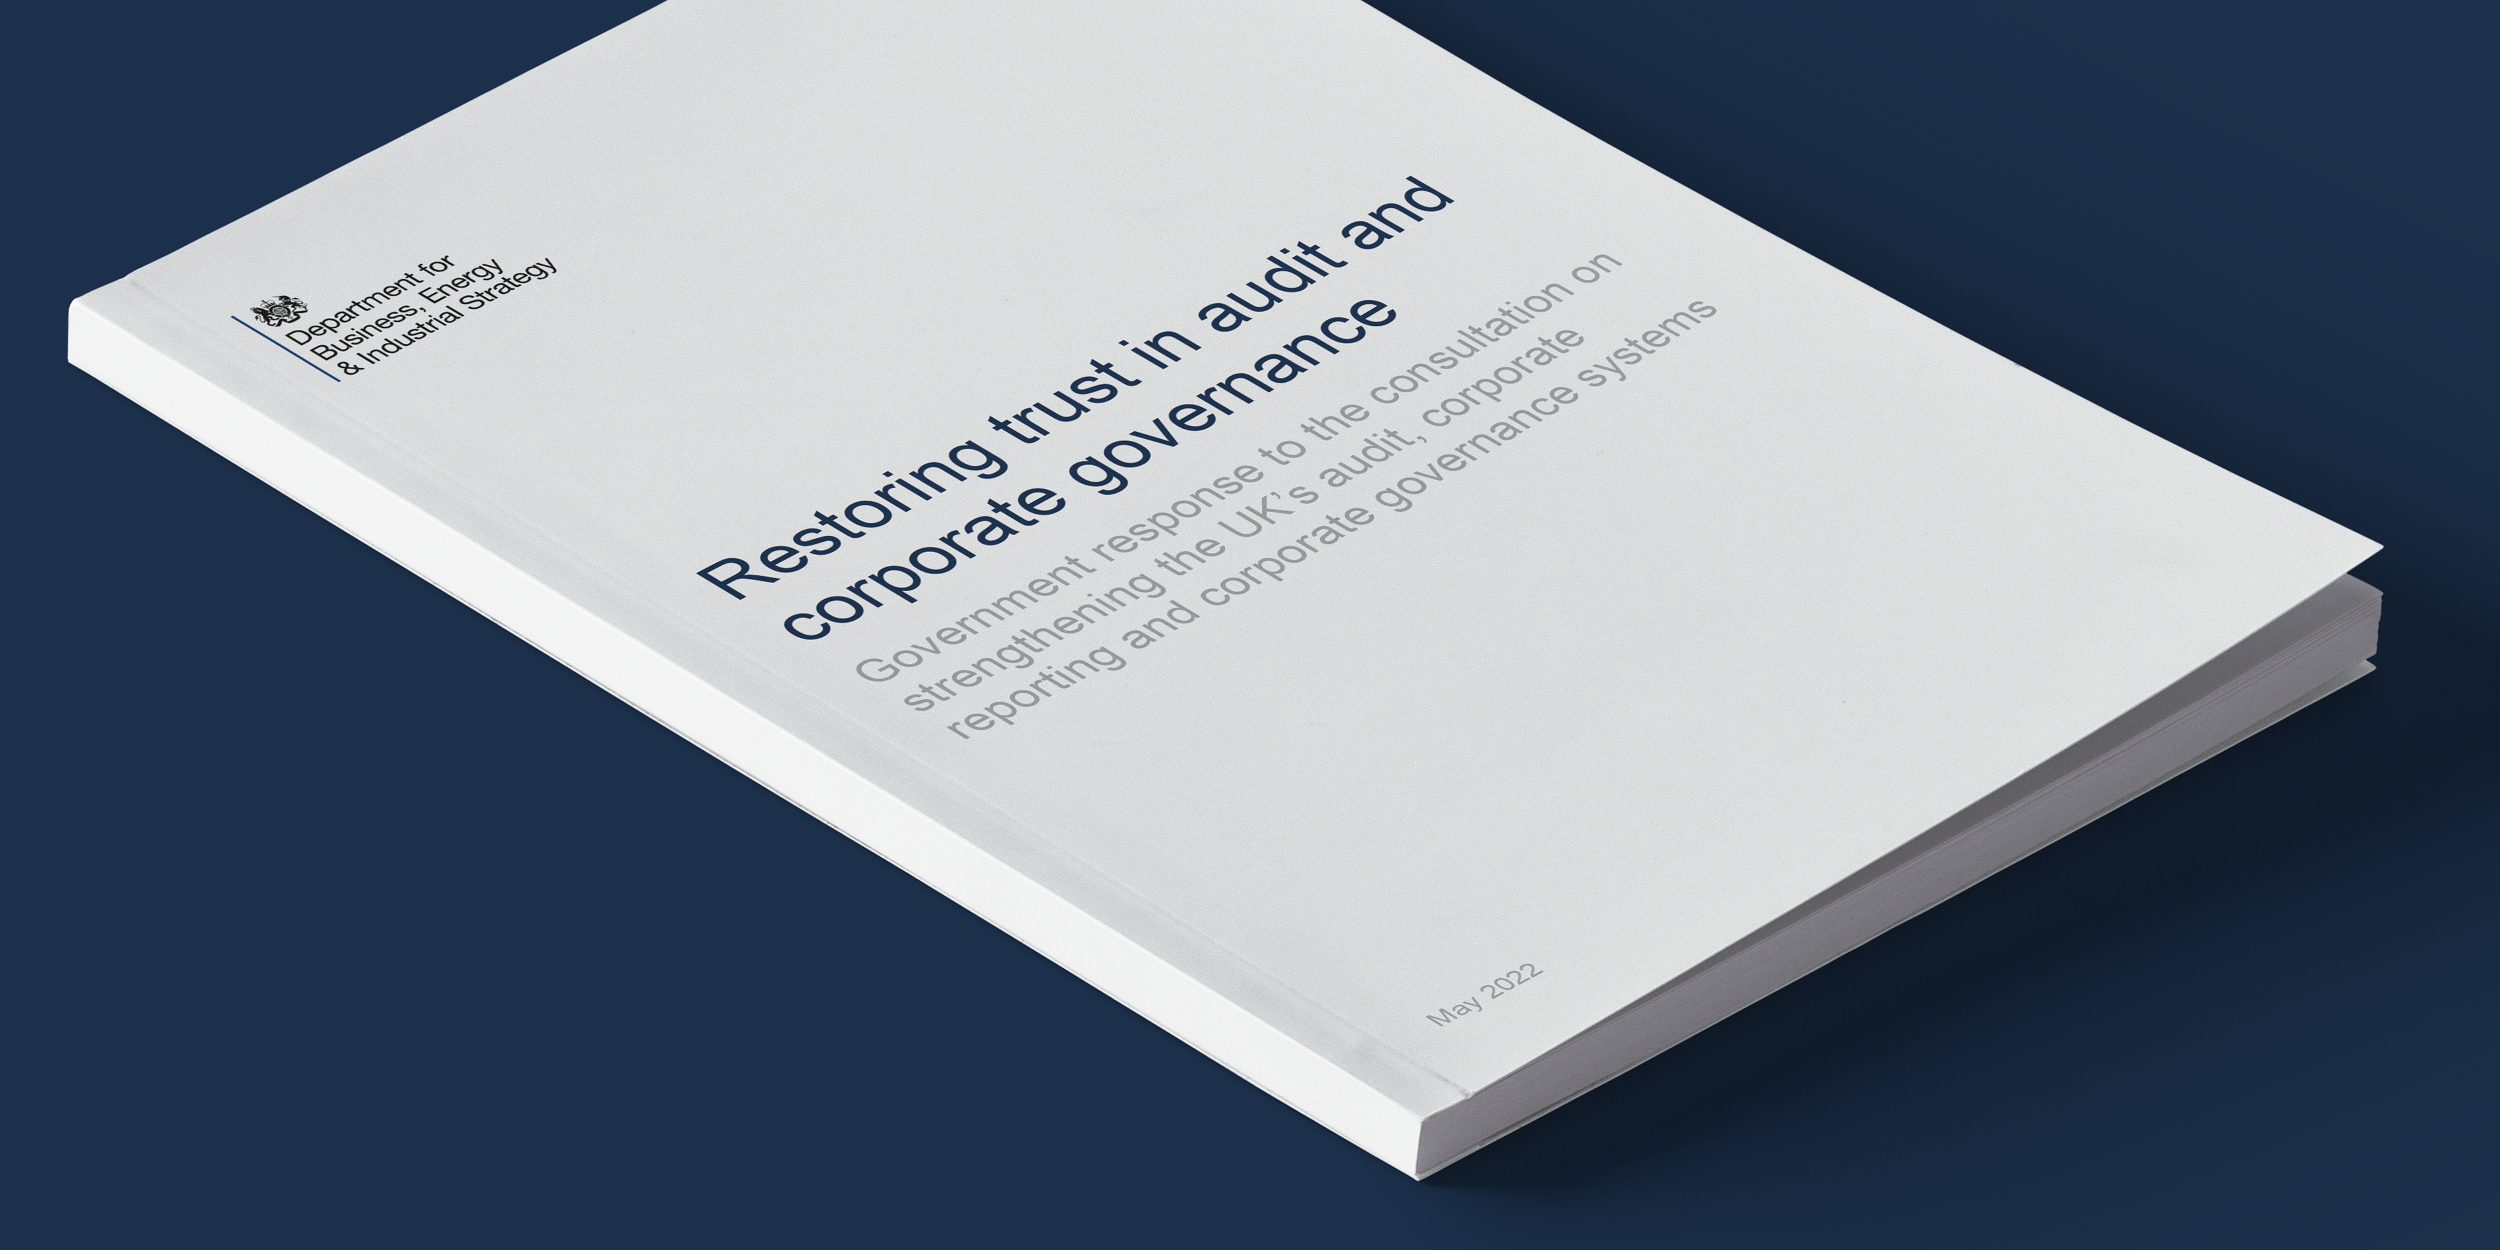 Restoring confidence in corporate and audit reporting: The BEIS’s upcoming reforms and how they’ll change the reporting landscape